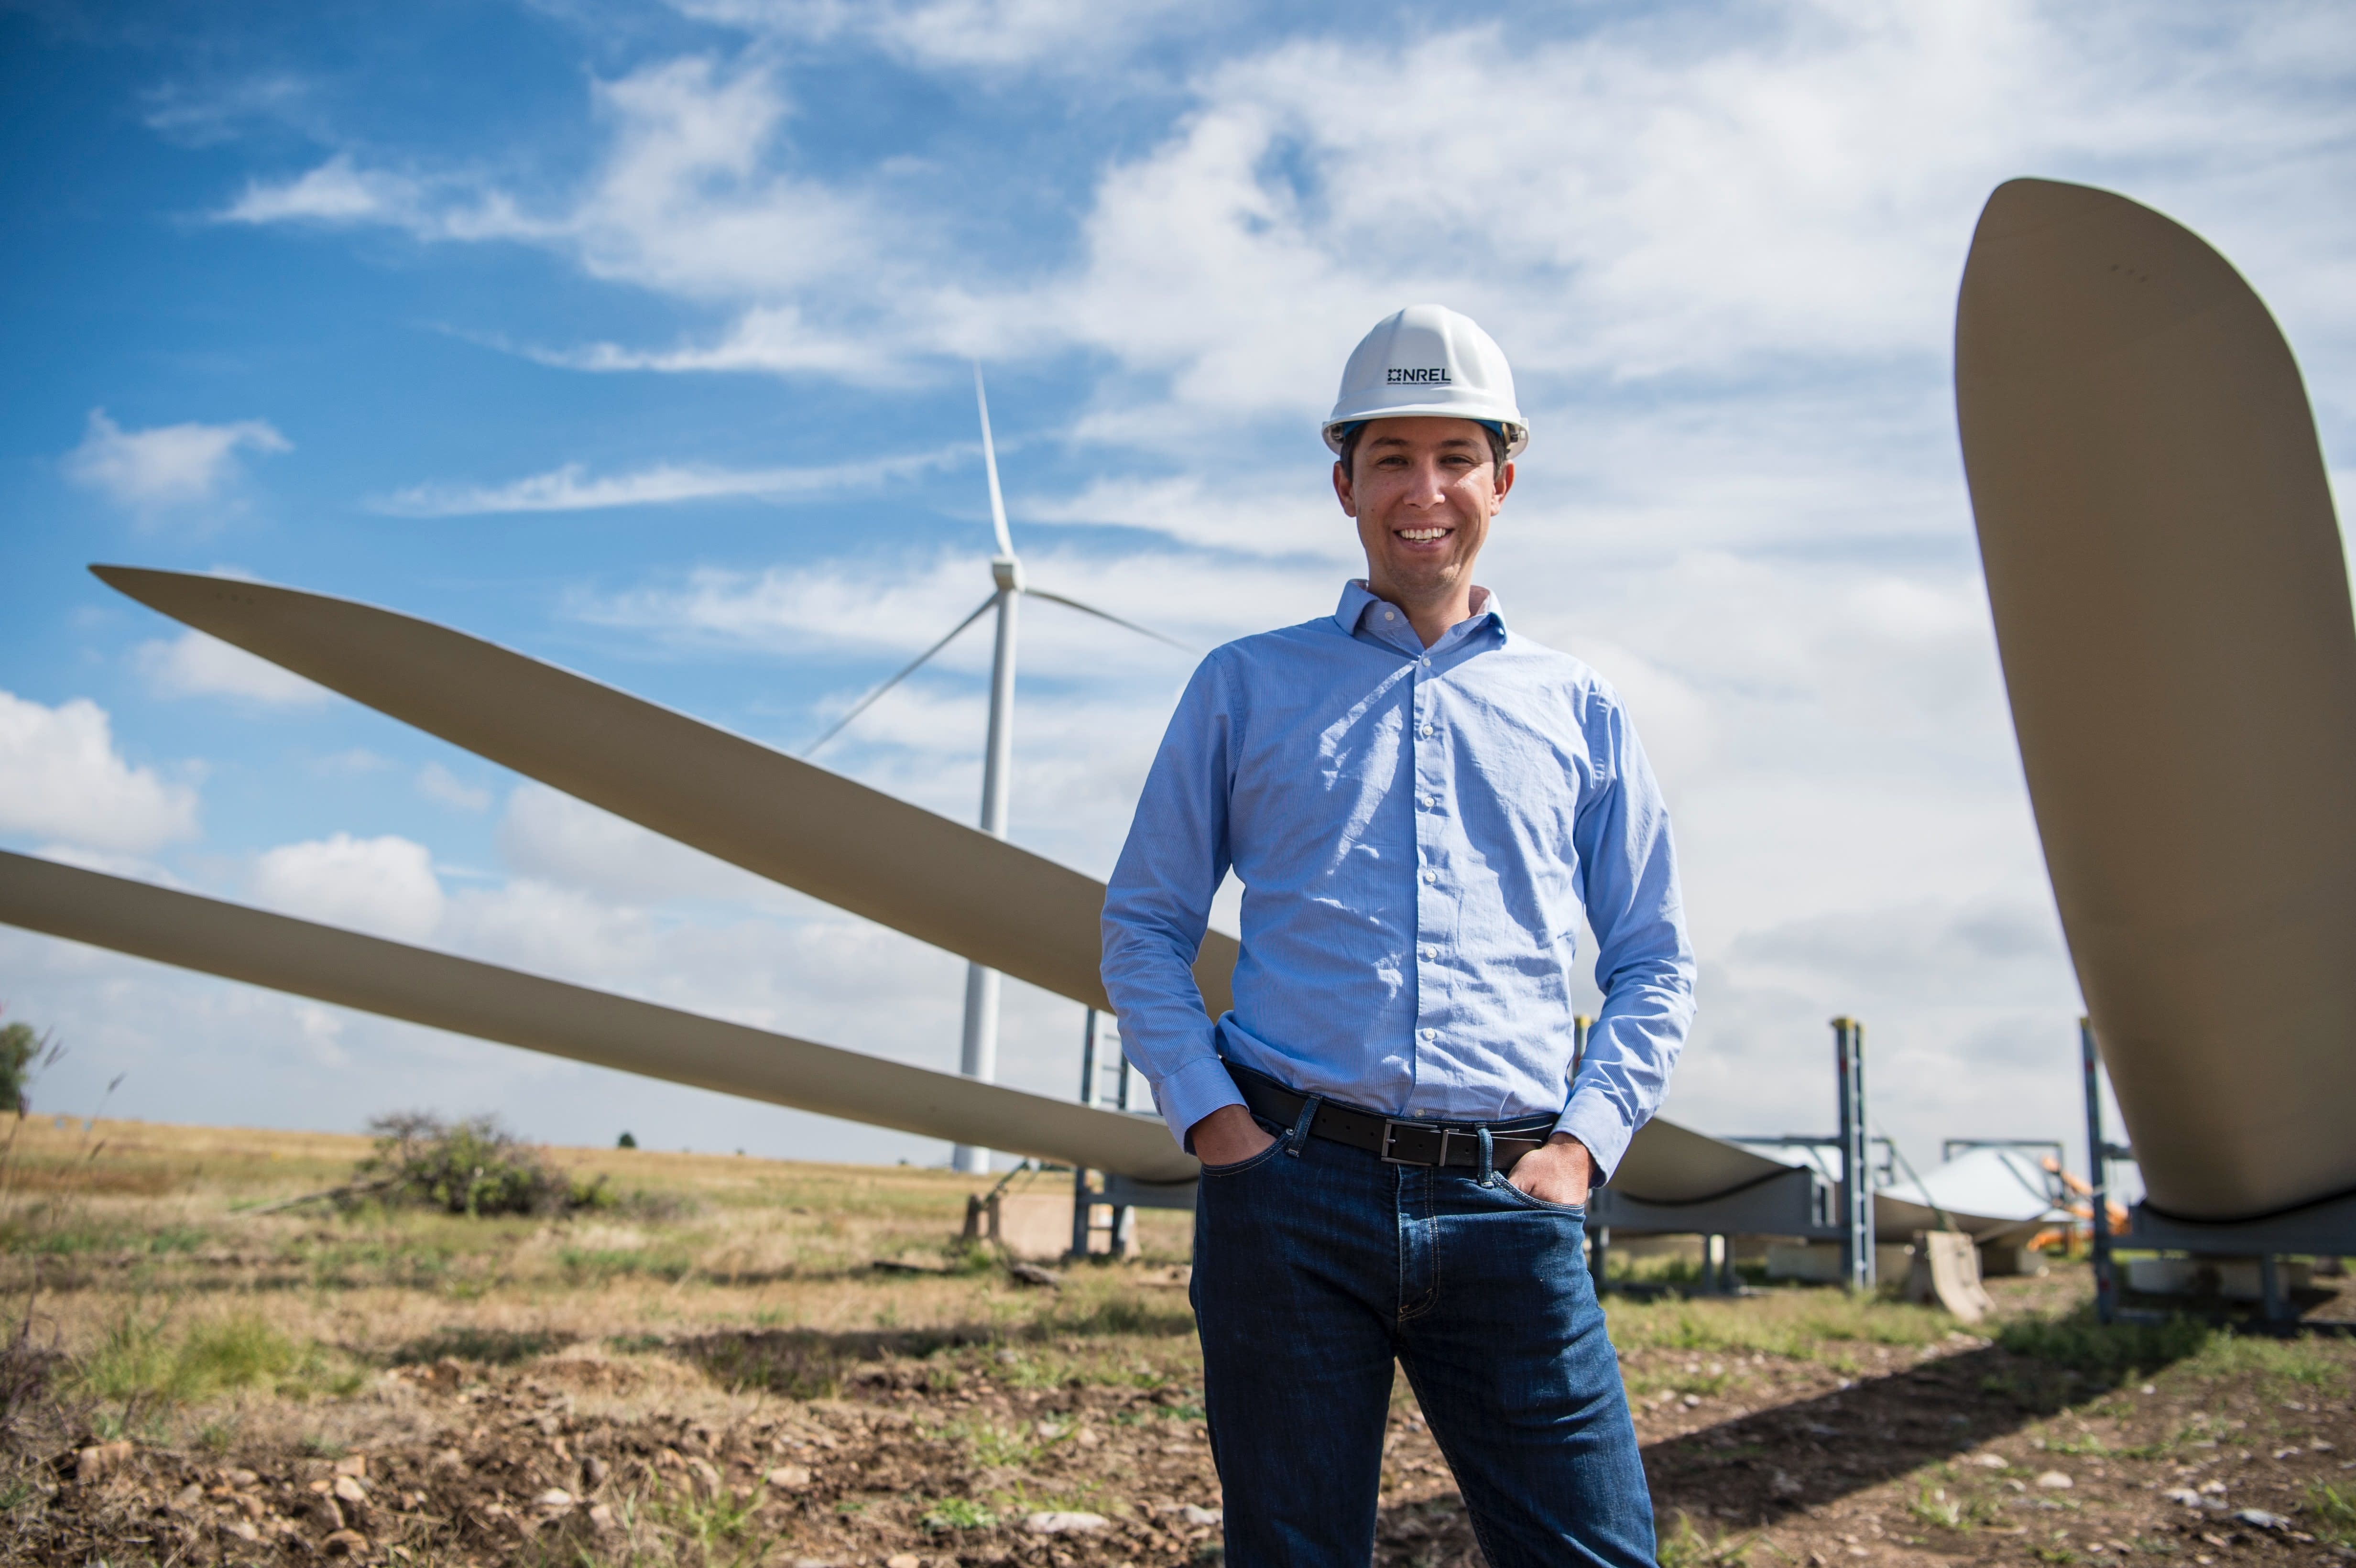 Nick Johnson came to NREL as an intern and is now an engineer working at the NWTC. Photo by Dennis Schroeder / NREL